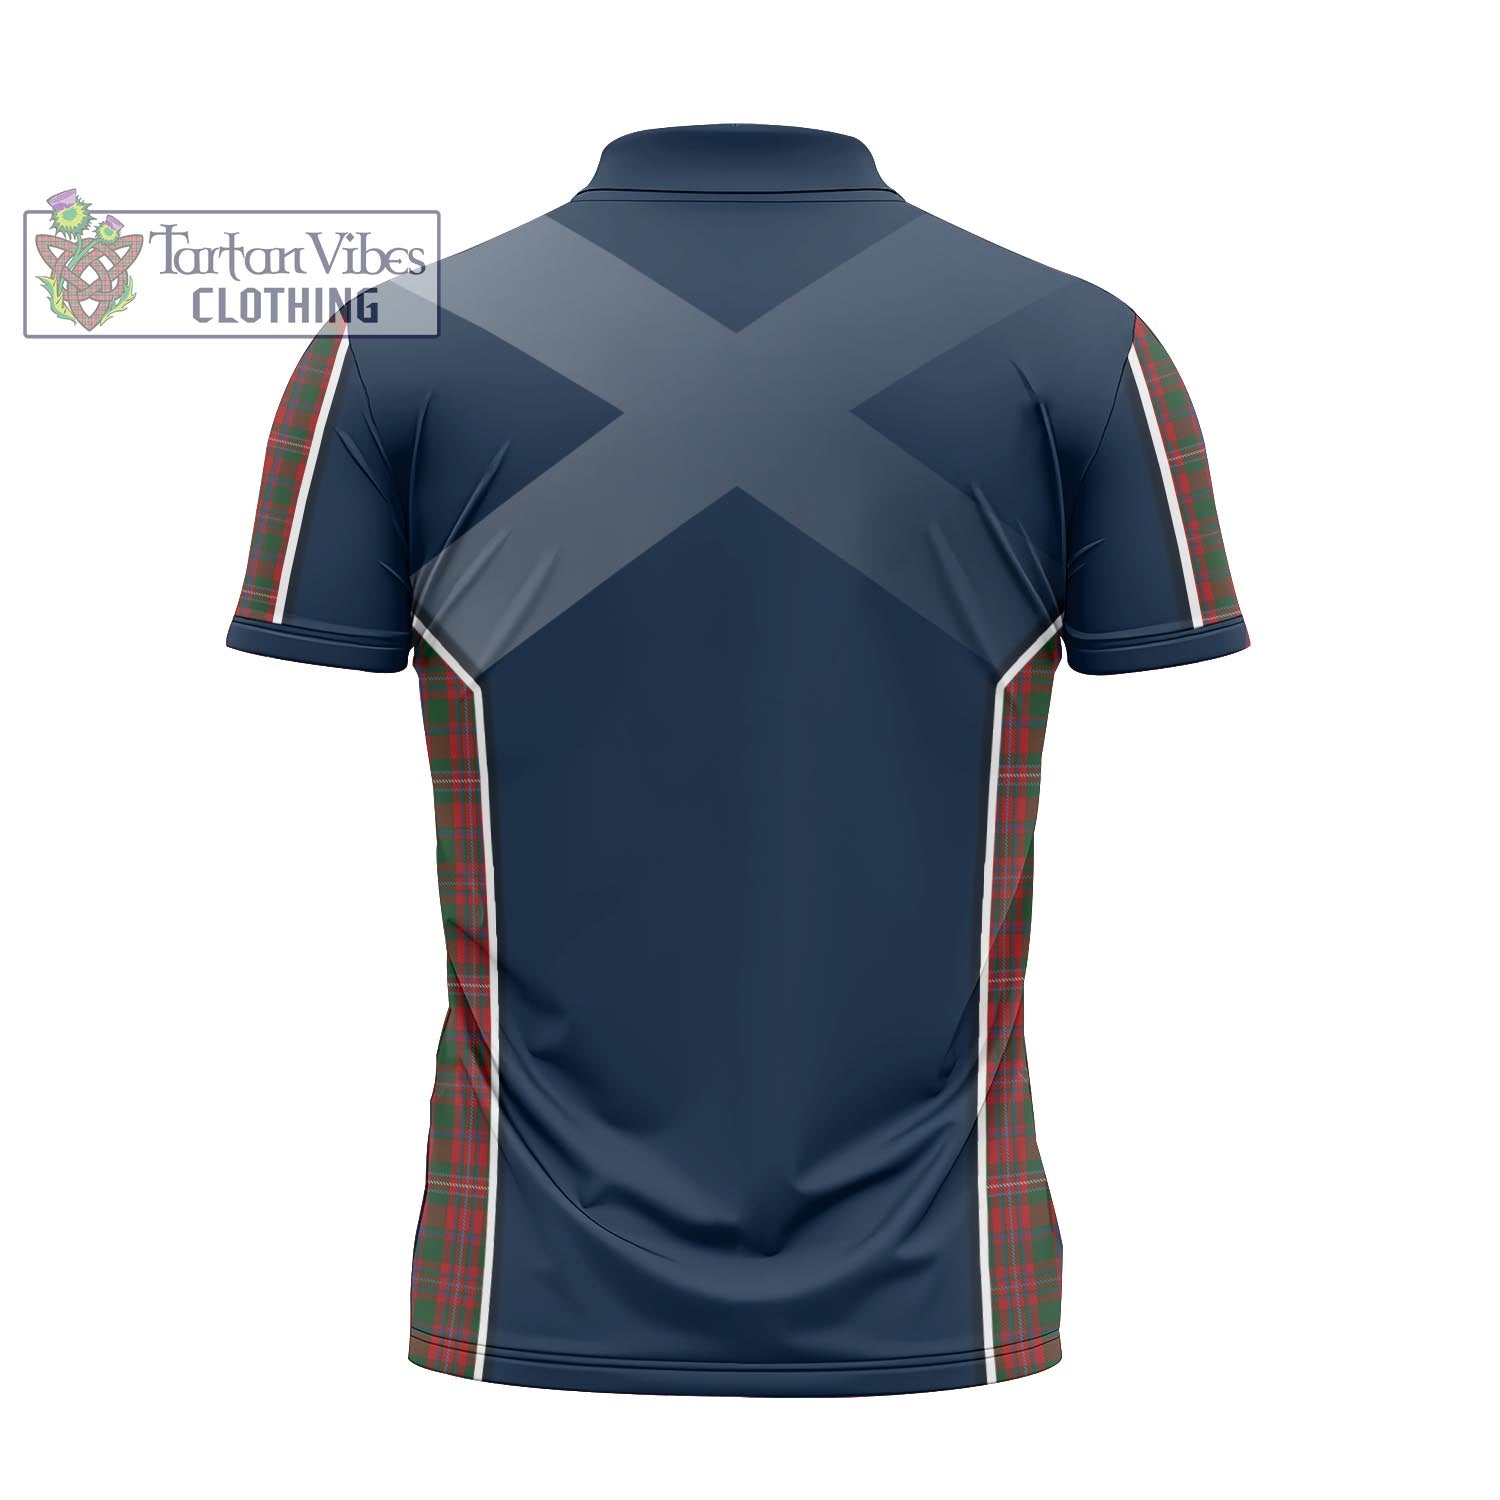 Tartan Vibes Clothing MacKinnon Tartan Zipper Polo Shirt with Family Crest and Scottish Thistle Vibes Sport Style